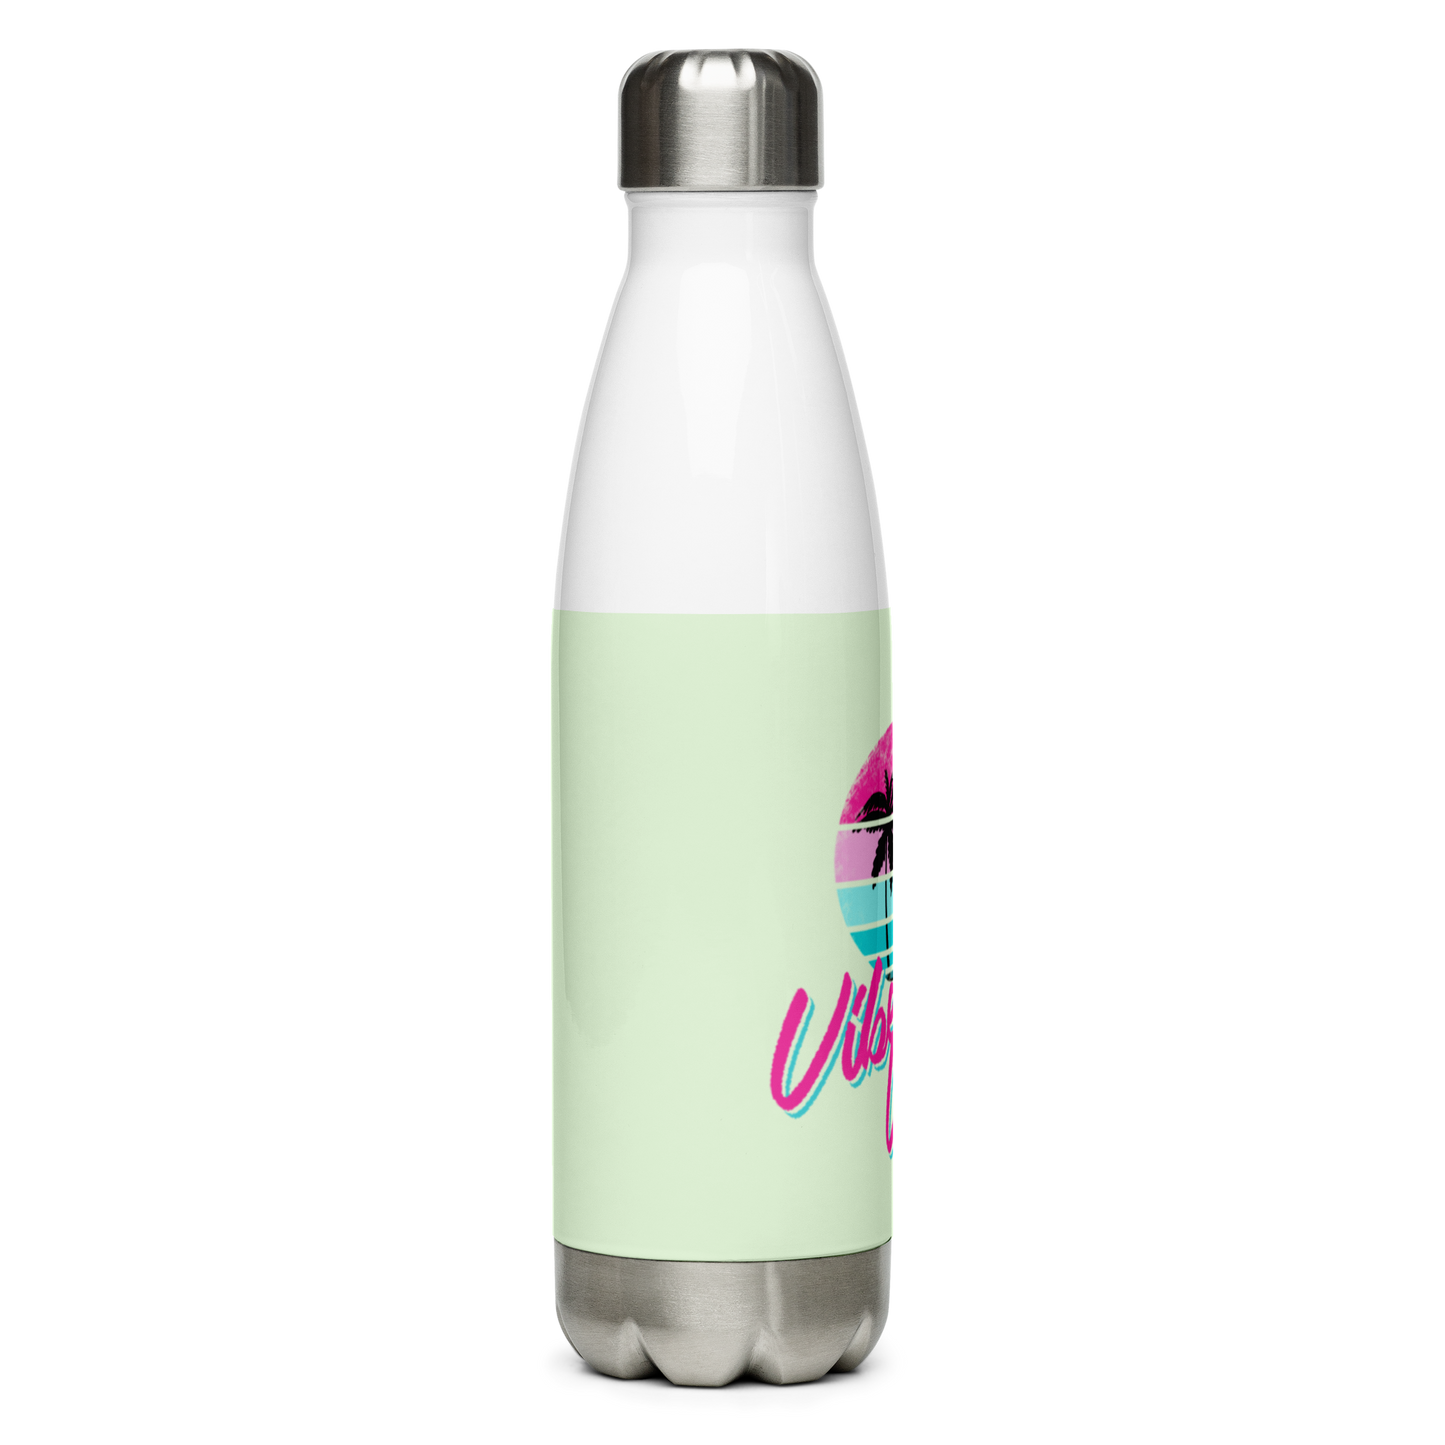 Vibe Vibe Stainless Steel Water Bottle